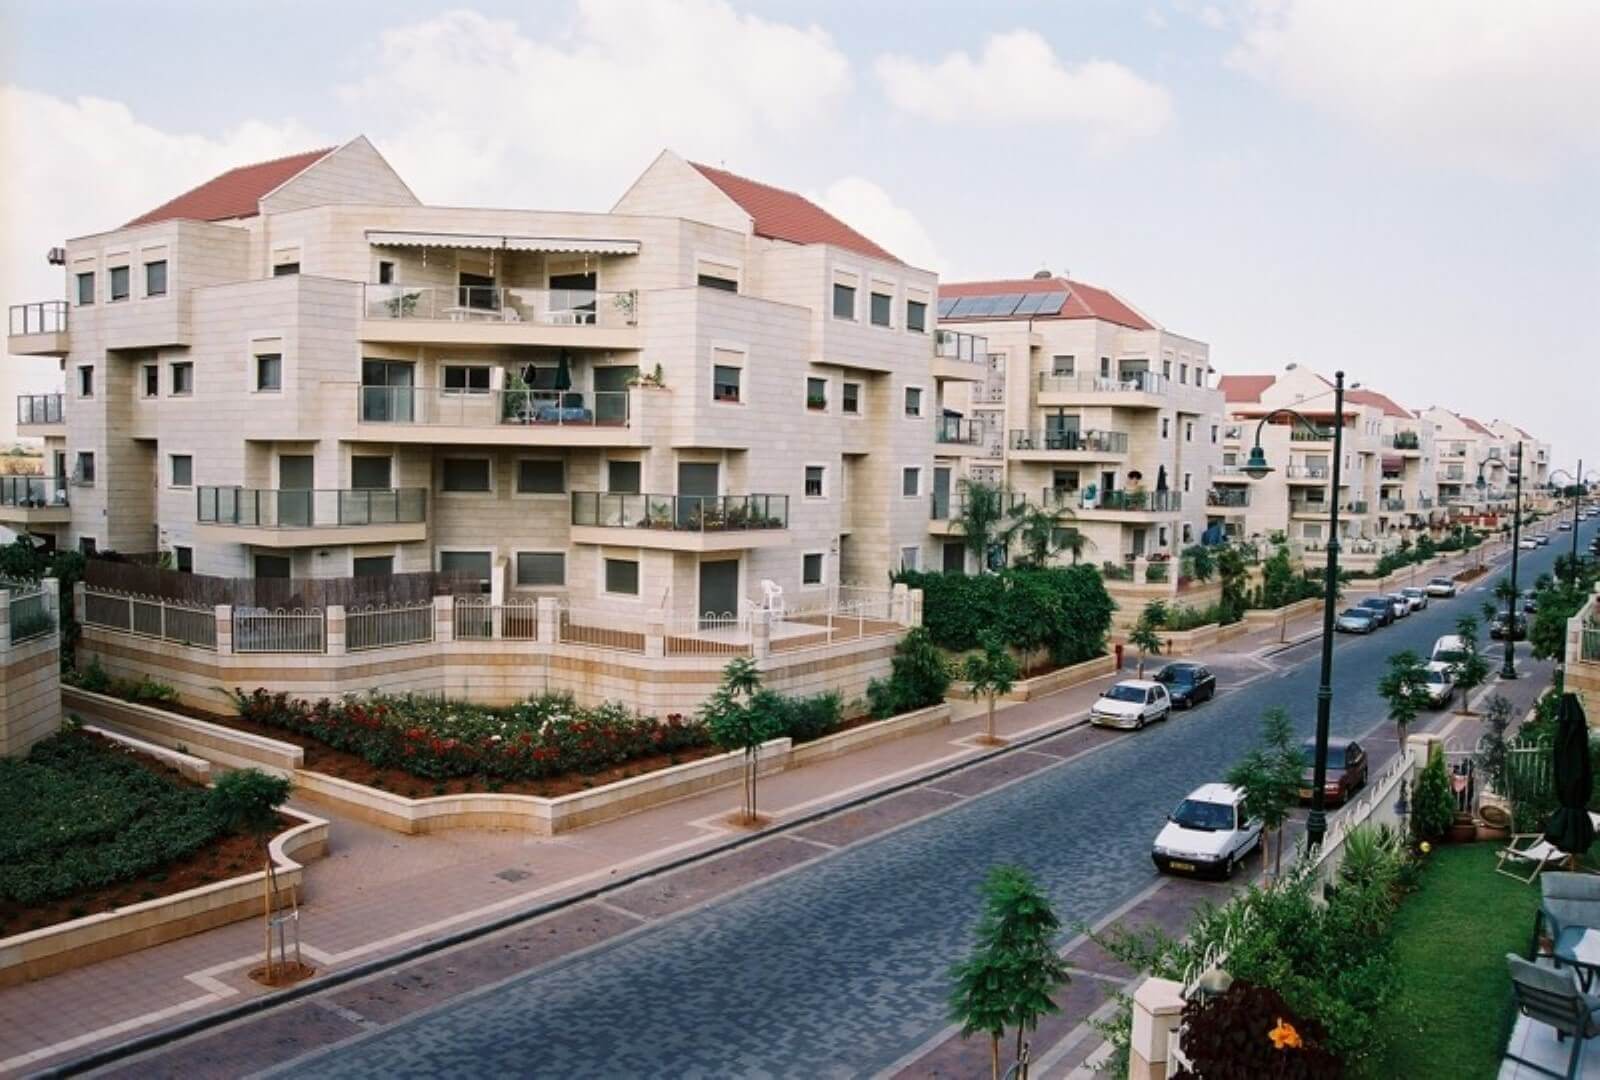 Photo of buildings from the Rishon Lezion Dream project